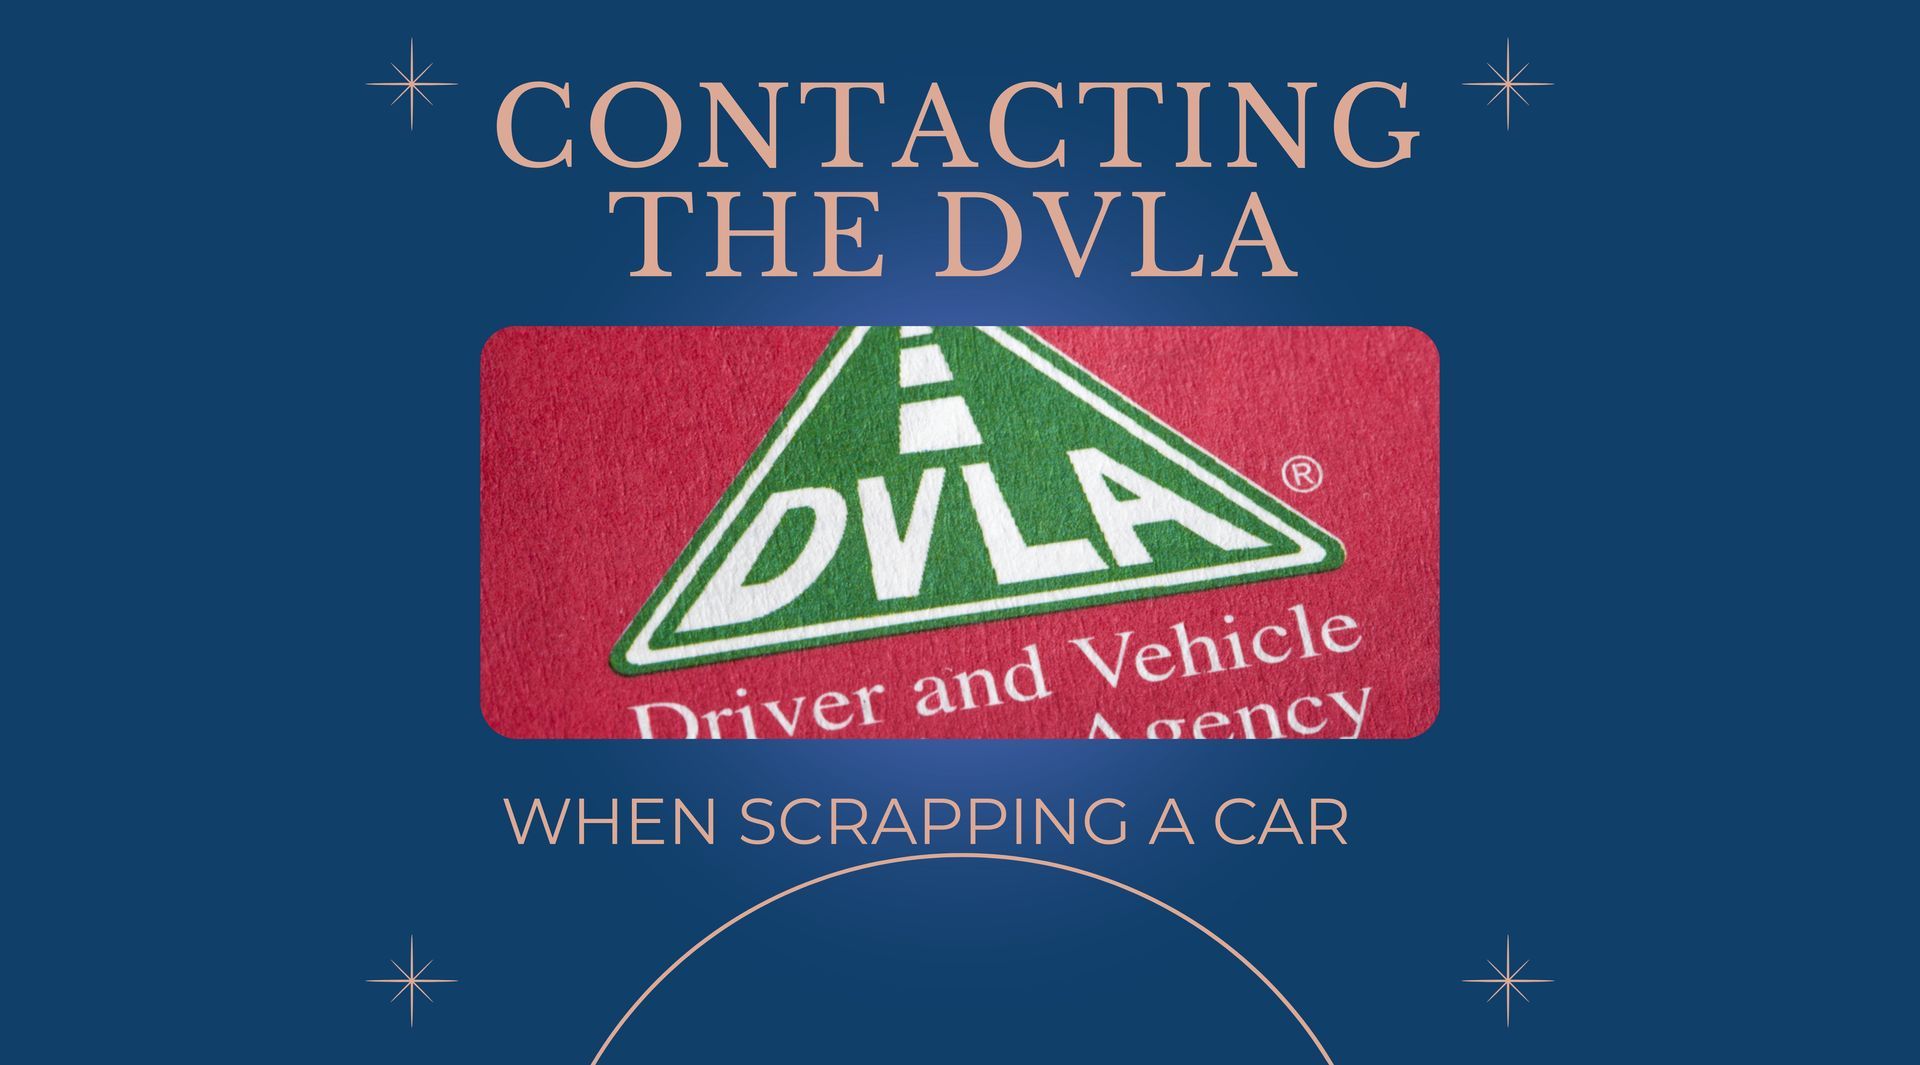 dvla letting them know Ive scrapped my car